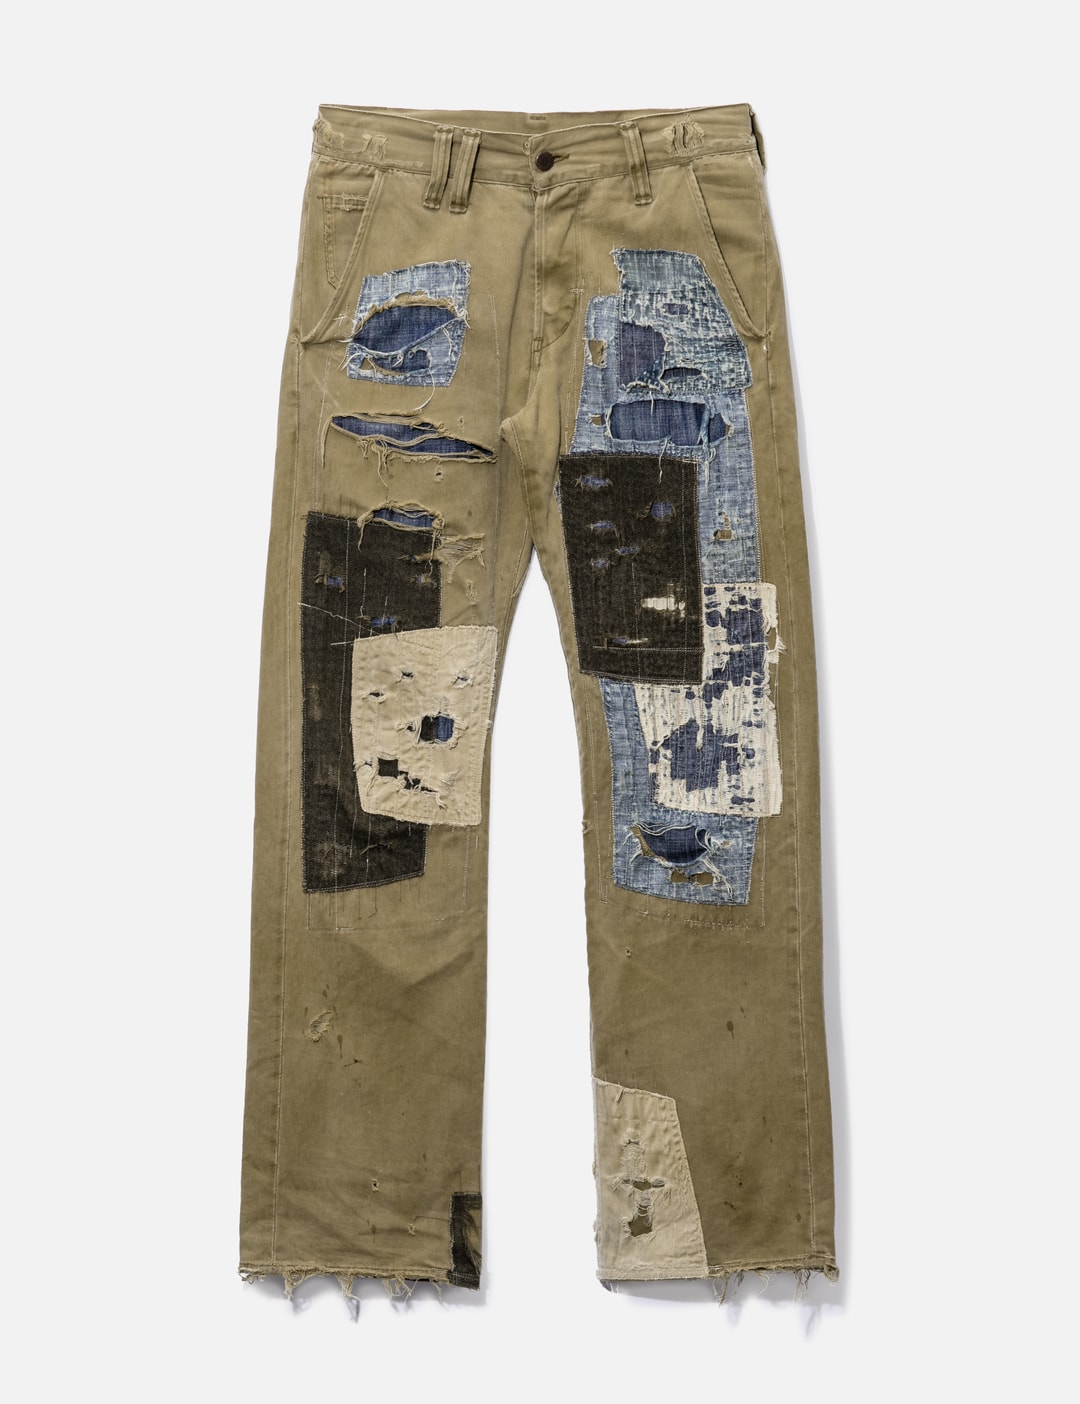 Women's Cargo Patchwork Straight Pant - Future Collective™ With